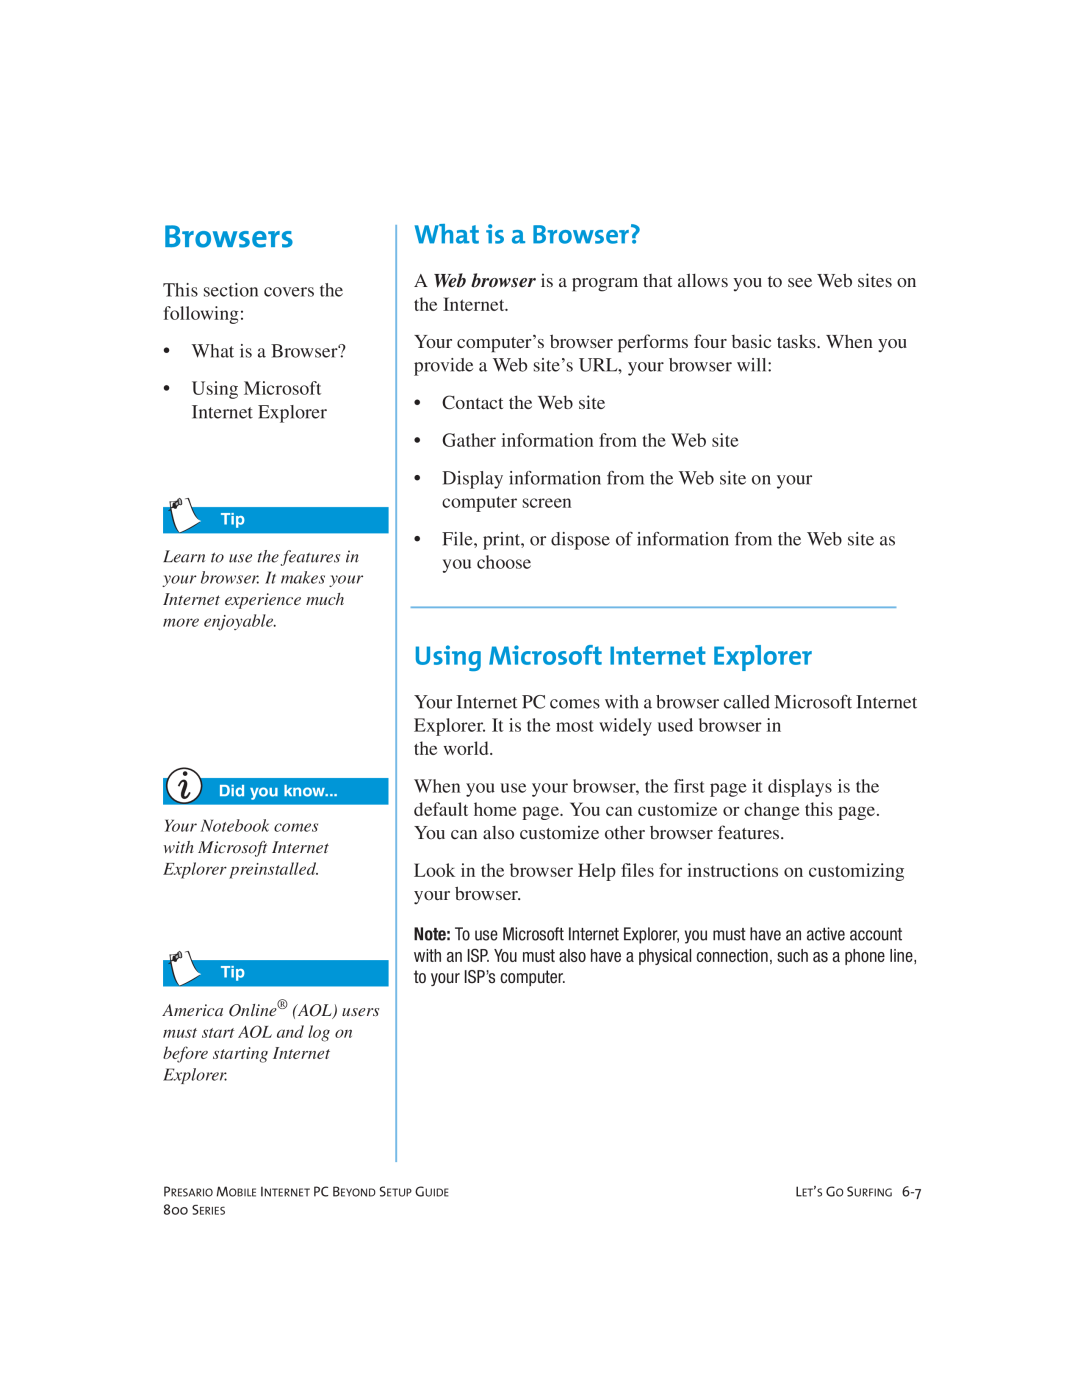 Compaq 800 manual Browsers, What is a Browser?, Using Microsoft Internet Explorer 